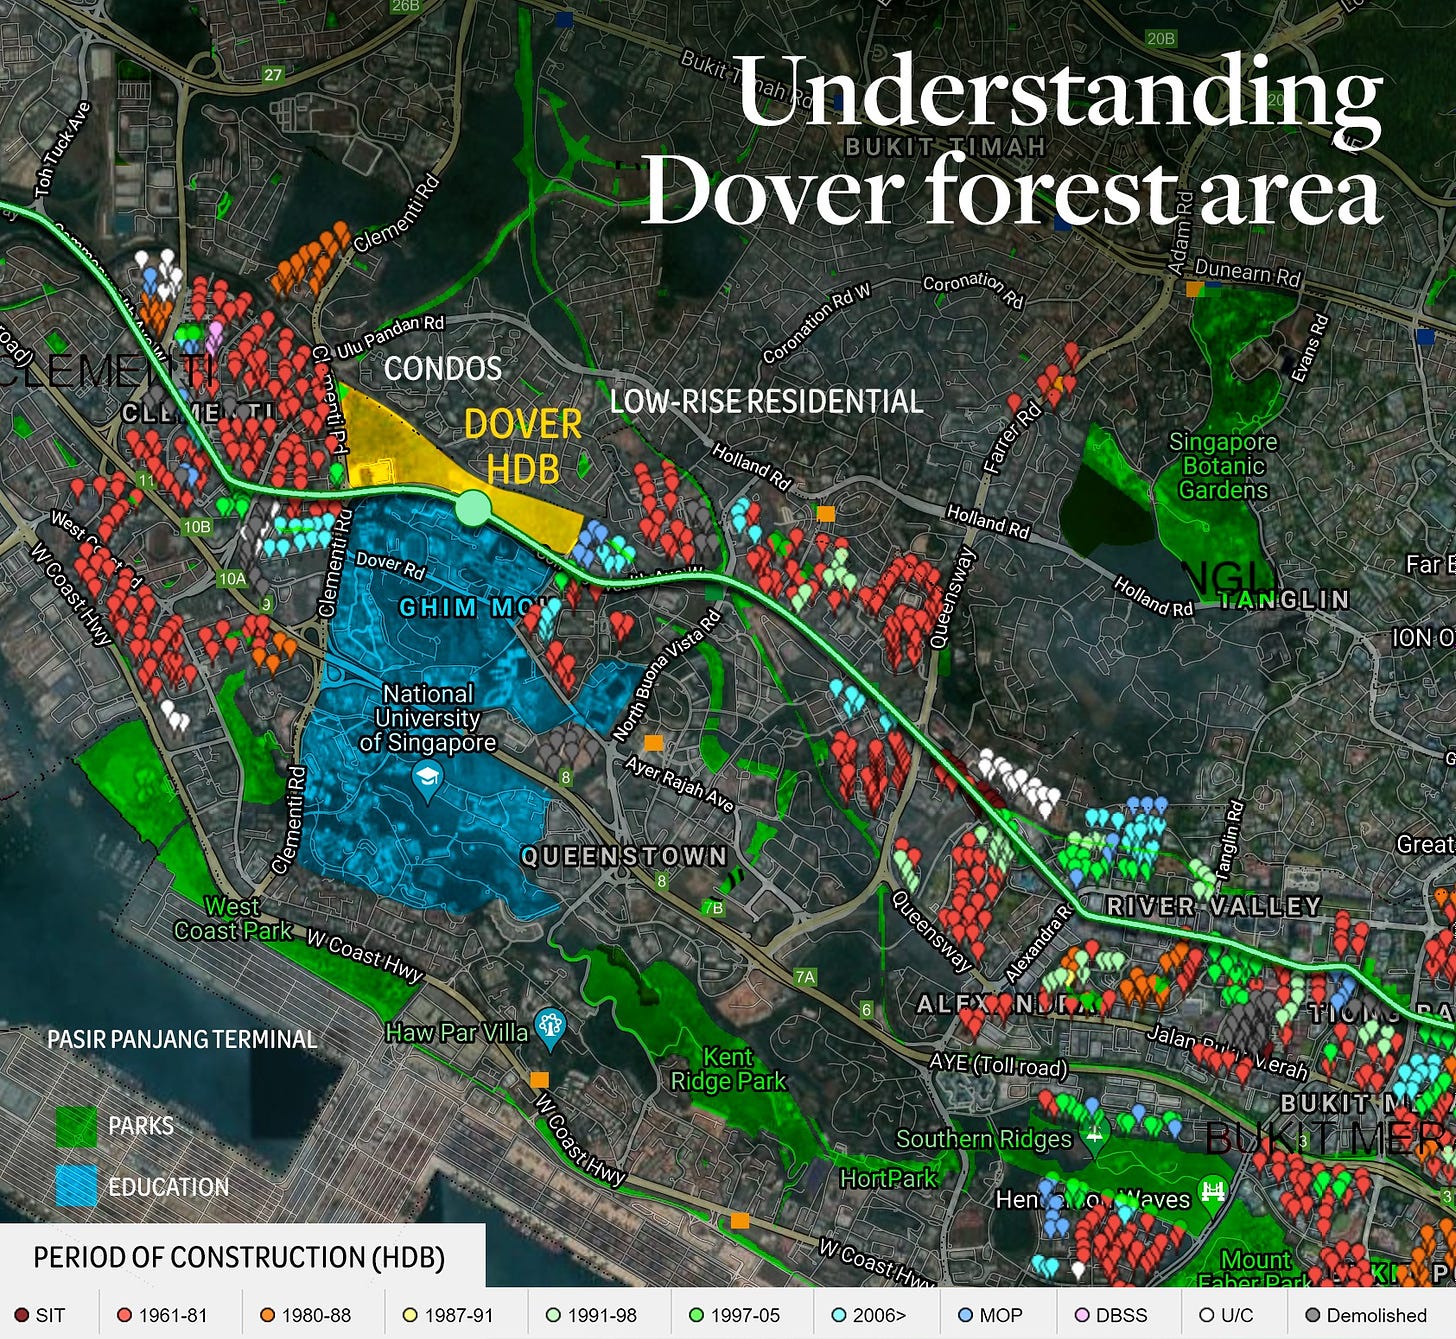 May be an image of map, sky and text that says 'Understanding Dover forest area UluPandan CONDOS DOVER LOW-RISE ERESIDENTIAL HDB Holland Rd GHIMM MC Singapore Botanic Gardens HollandRd National University Singapore Holland Far TANGLIN Ayer Rajah ION QUEENSTOWN අදද PASIRPANJANGTERMINAL Great lPaVll PARKS Queensway RIVERVALLEY Ridge EDUCATION (Toll road) Jalan PERIOD OF CONSTRUCTION (HDB) SIT Merah BUKIT Southe HortPark 1961-81 Ridges 1980-88 • 1987-91 1991-98 1997-05 2006> MOP DBSS OU/C Demolished'